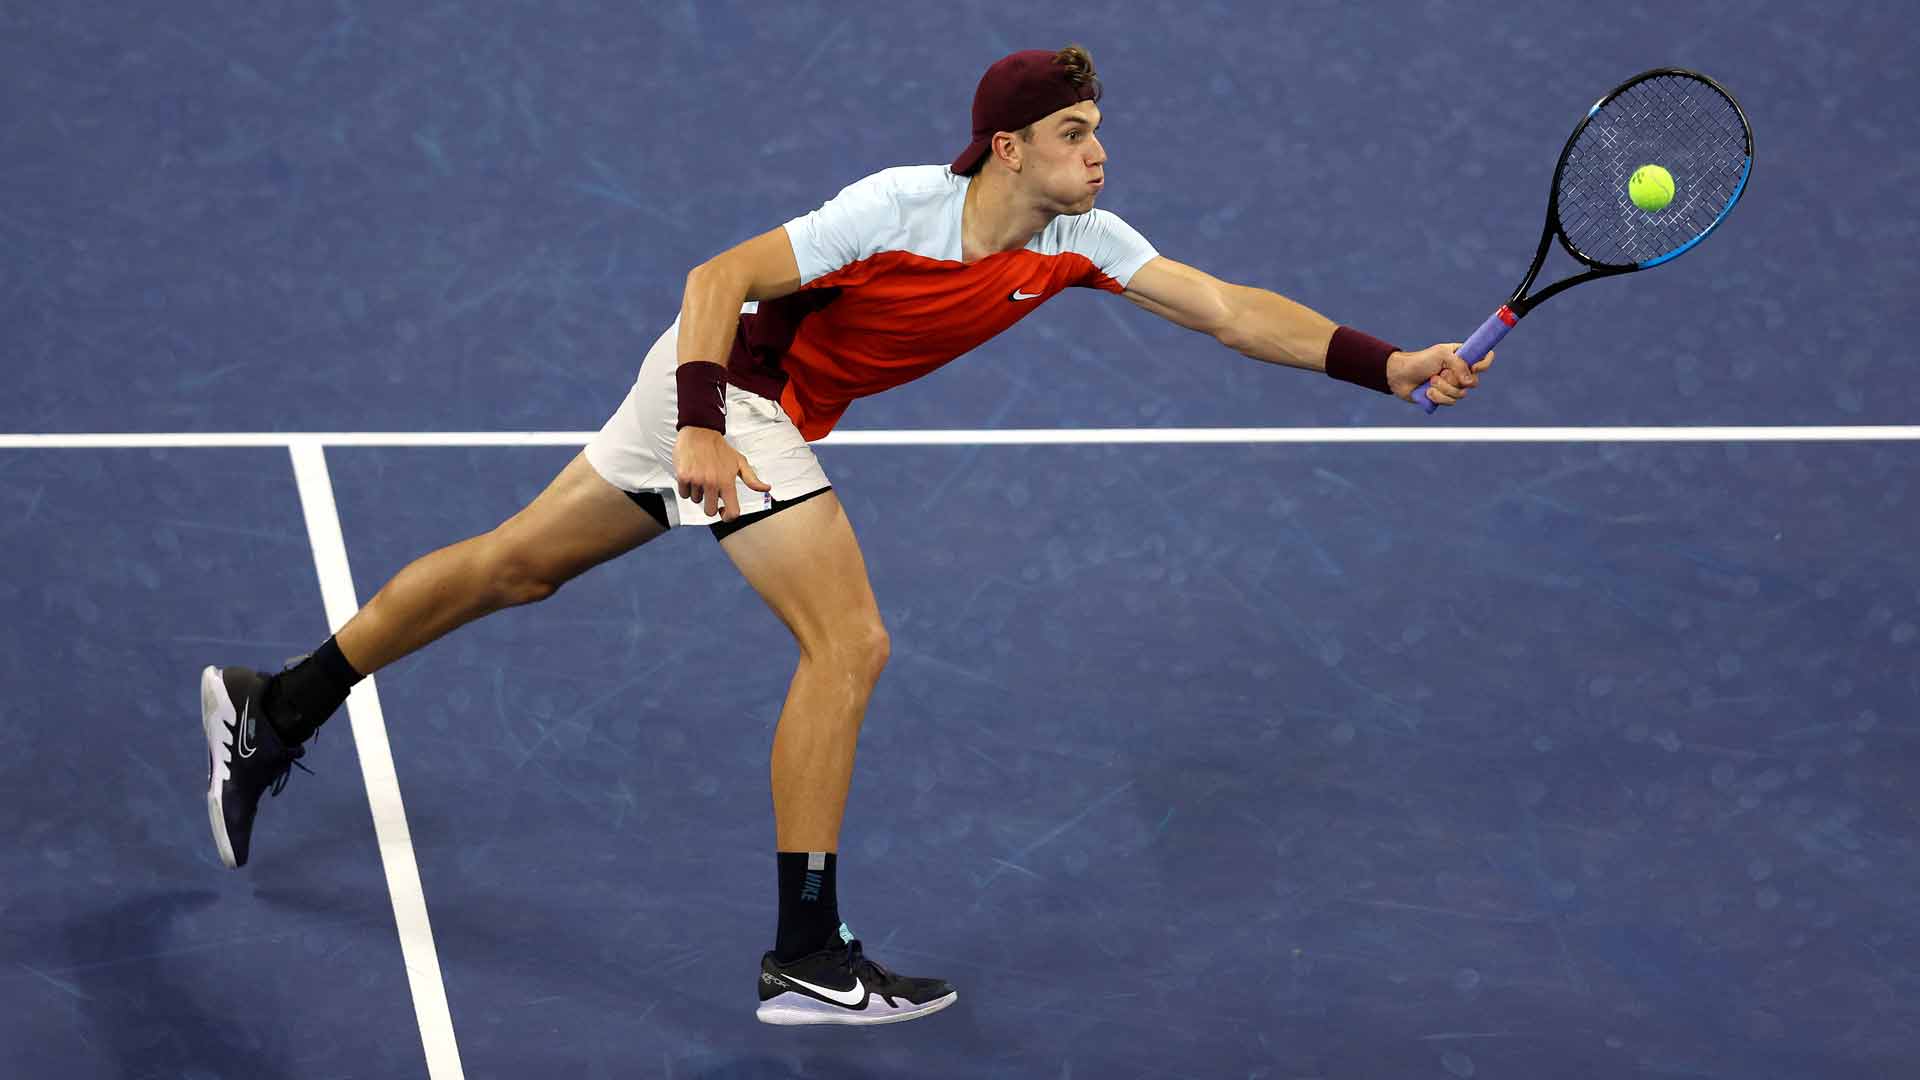 <a href='https://www.atptour.com/en/players/jack-draper/d0co/overview'>Jack Draper</a> in action at the 2022 <a href='https://www.atptour.com/en/tournaments/us-open/560/overview'>US Open</a>, where he made the third round.